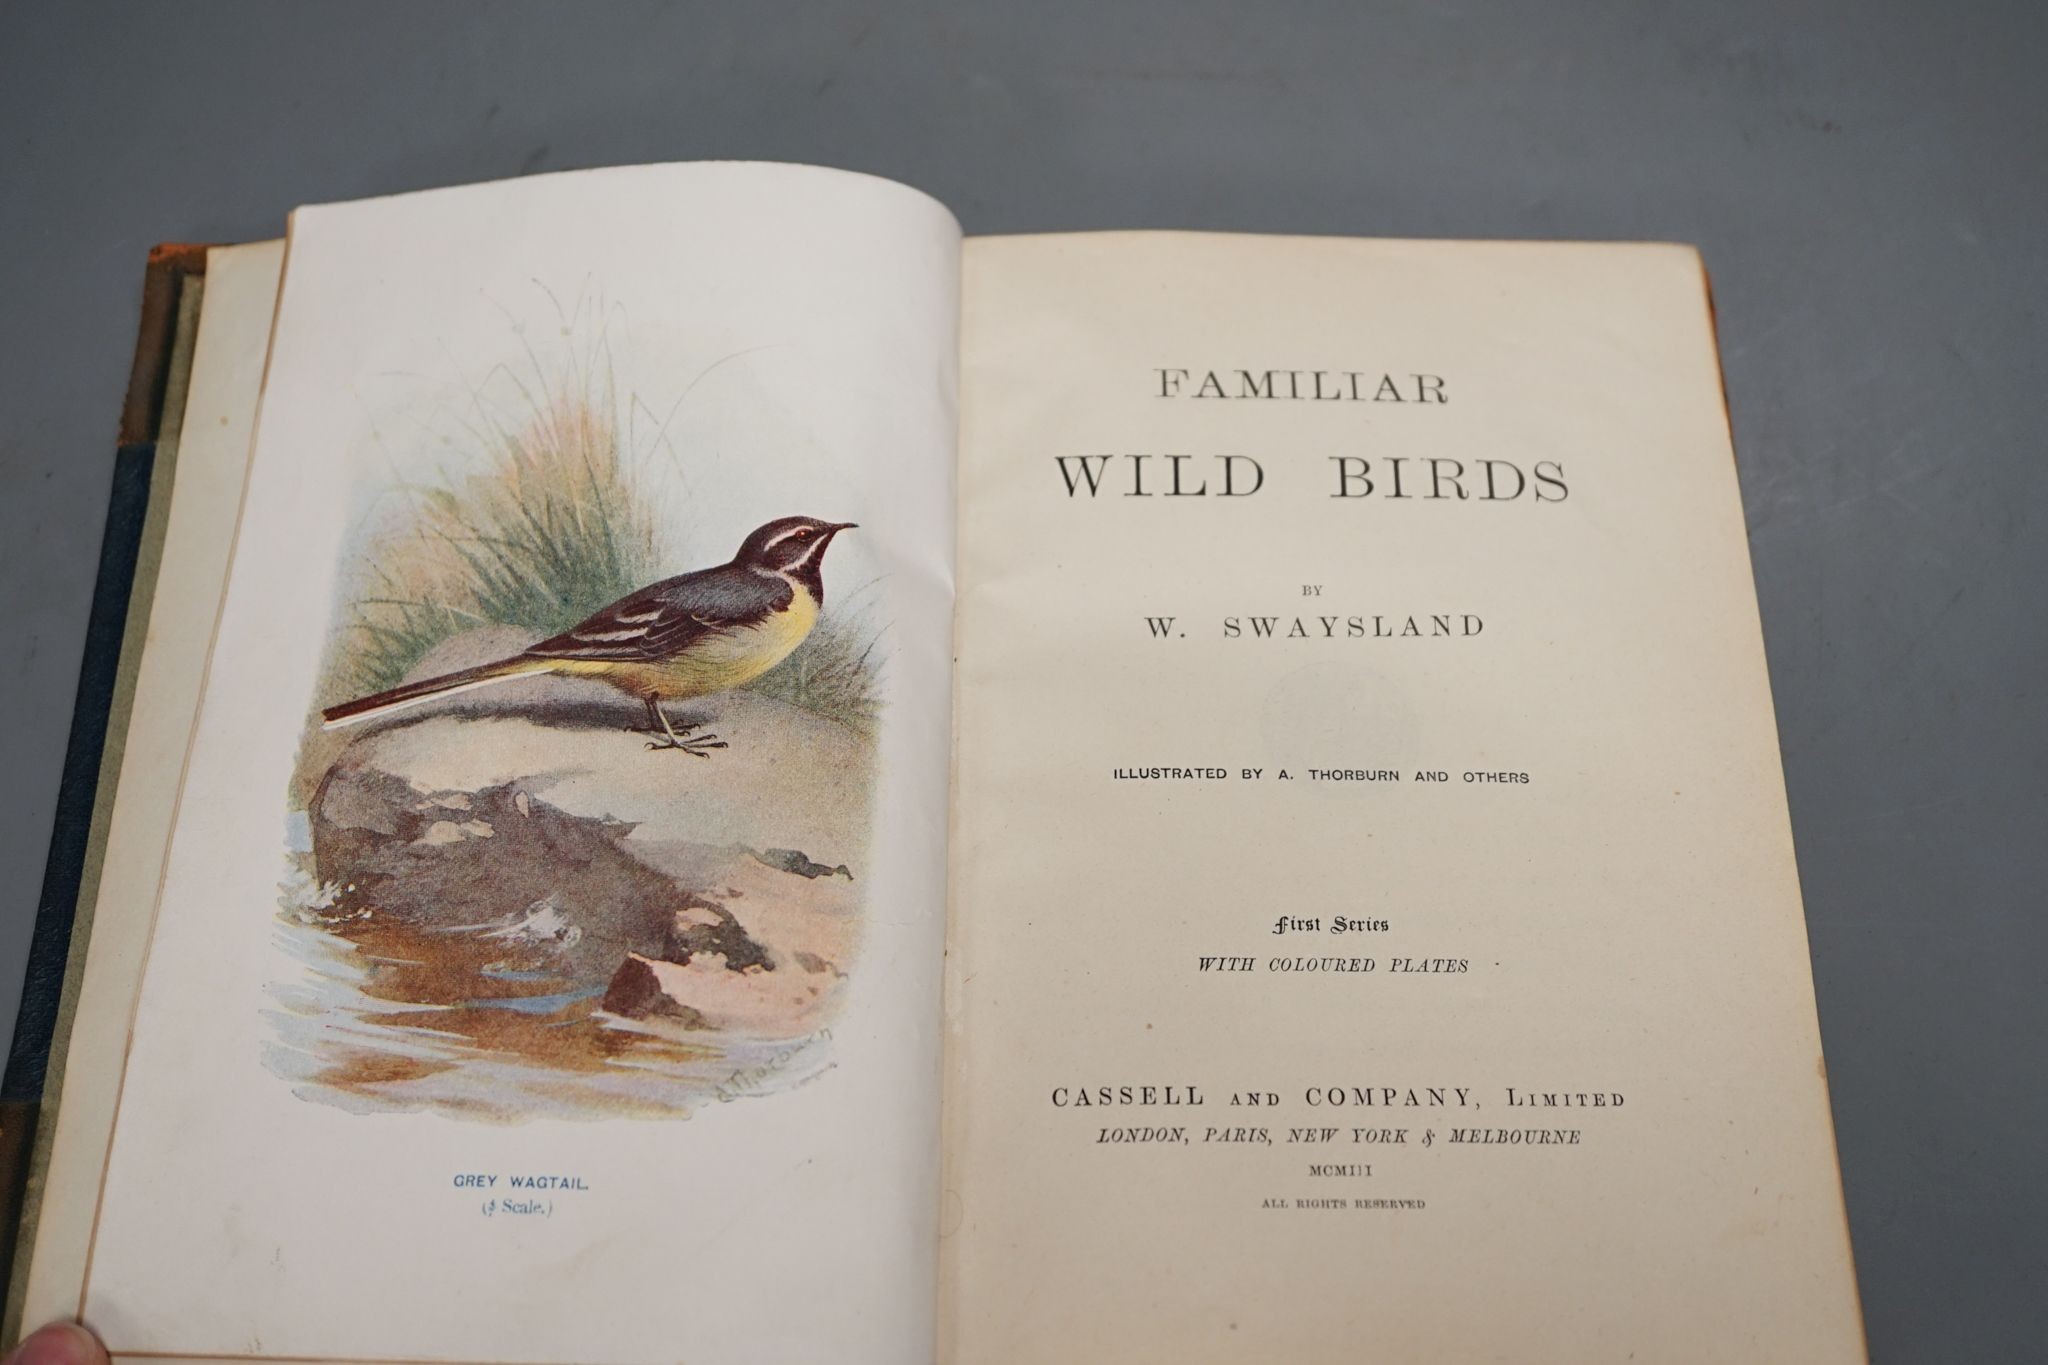 Swaysland, W. - Familiar Wild Birds, 4 vols, num. colour-printed plates (by Thorburn & Others), engraved text illus., half titles; contemp. half leather and cloth, 1903